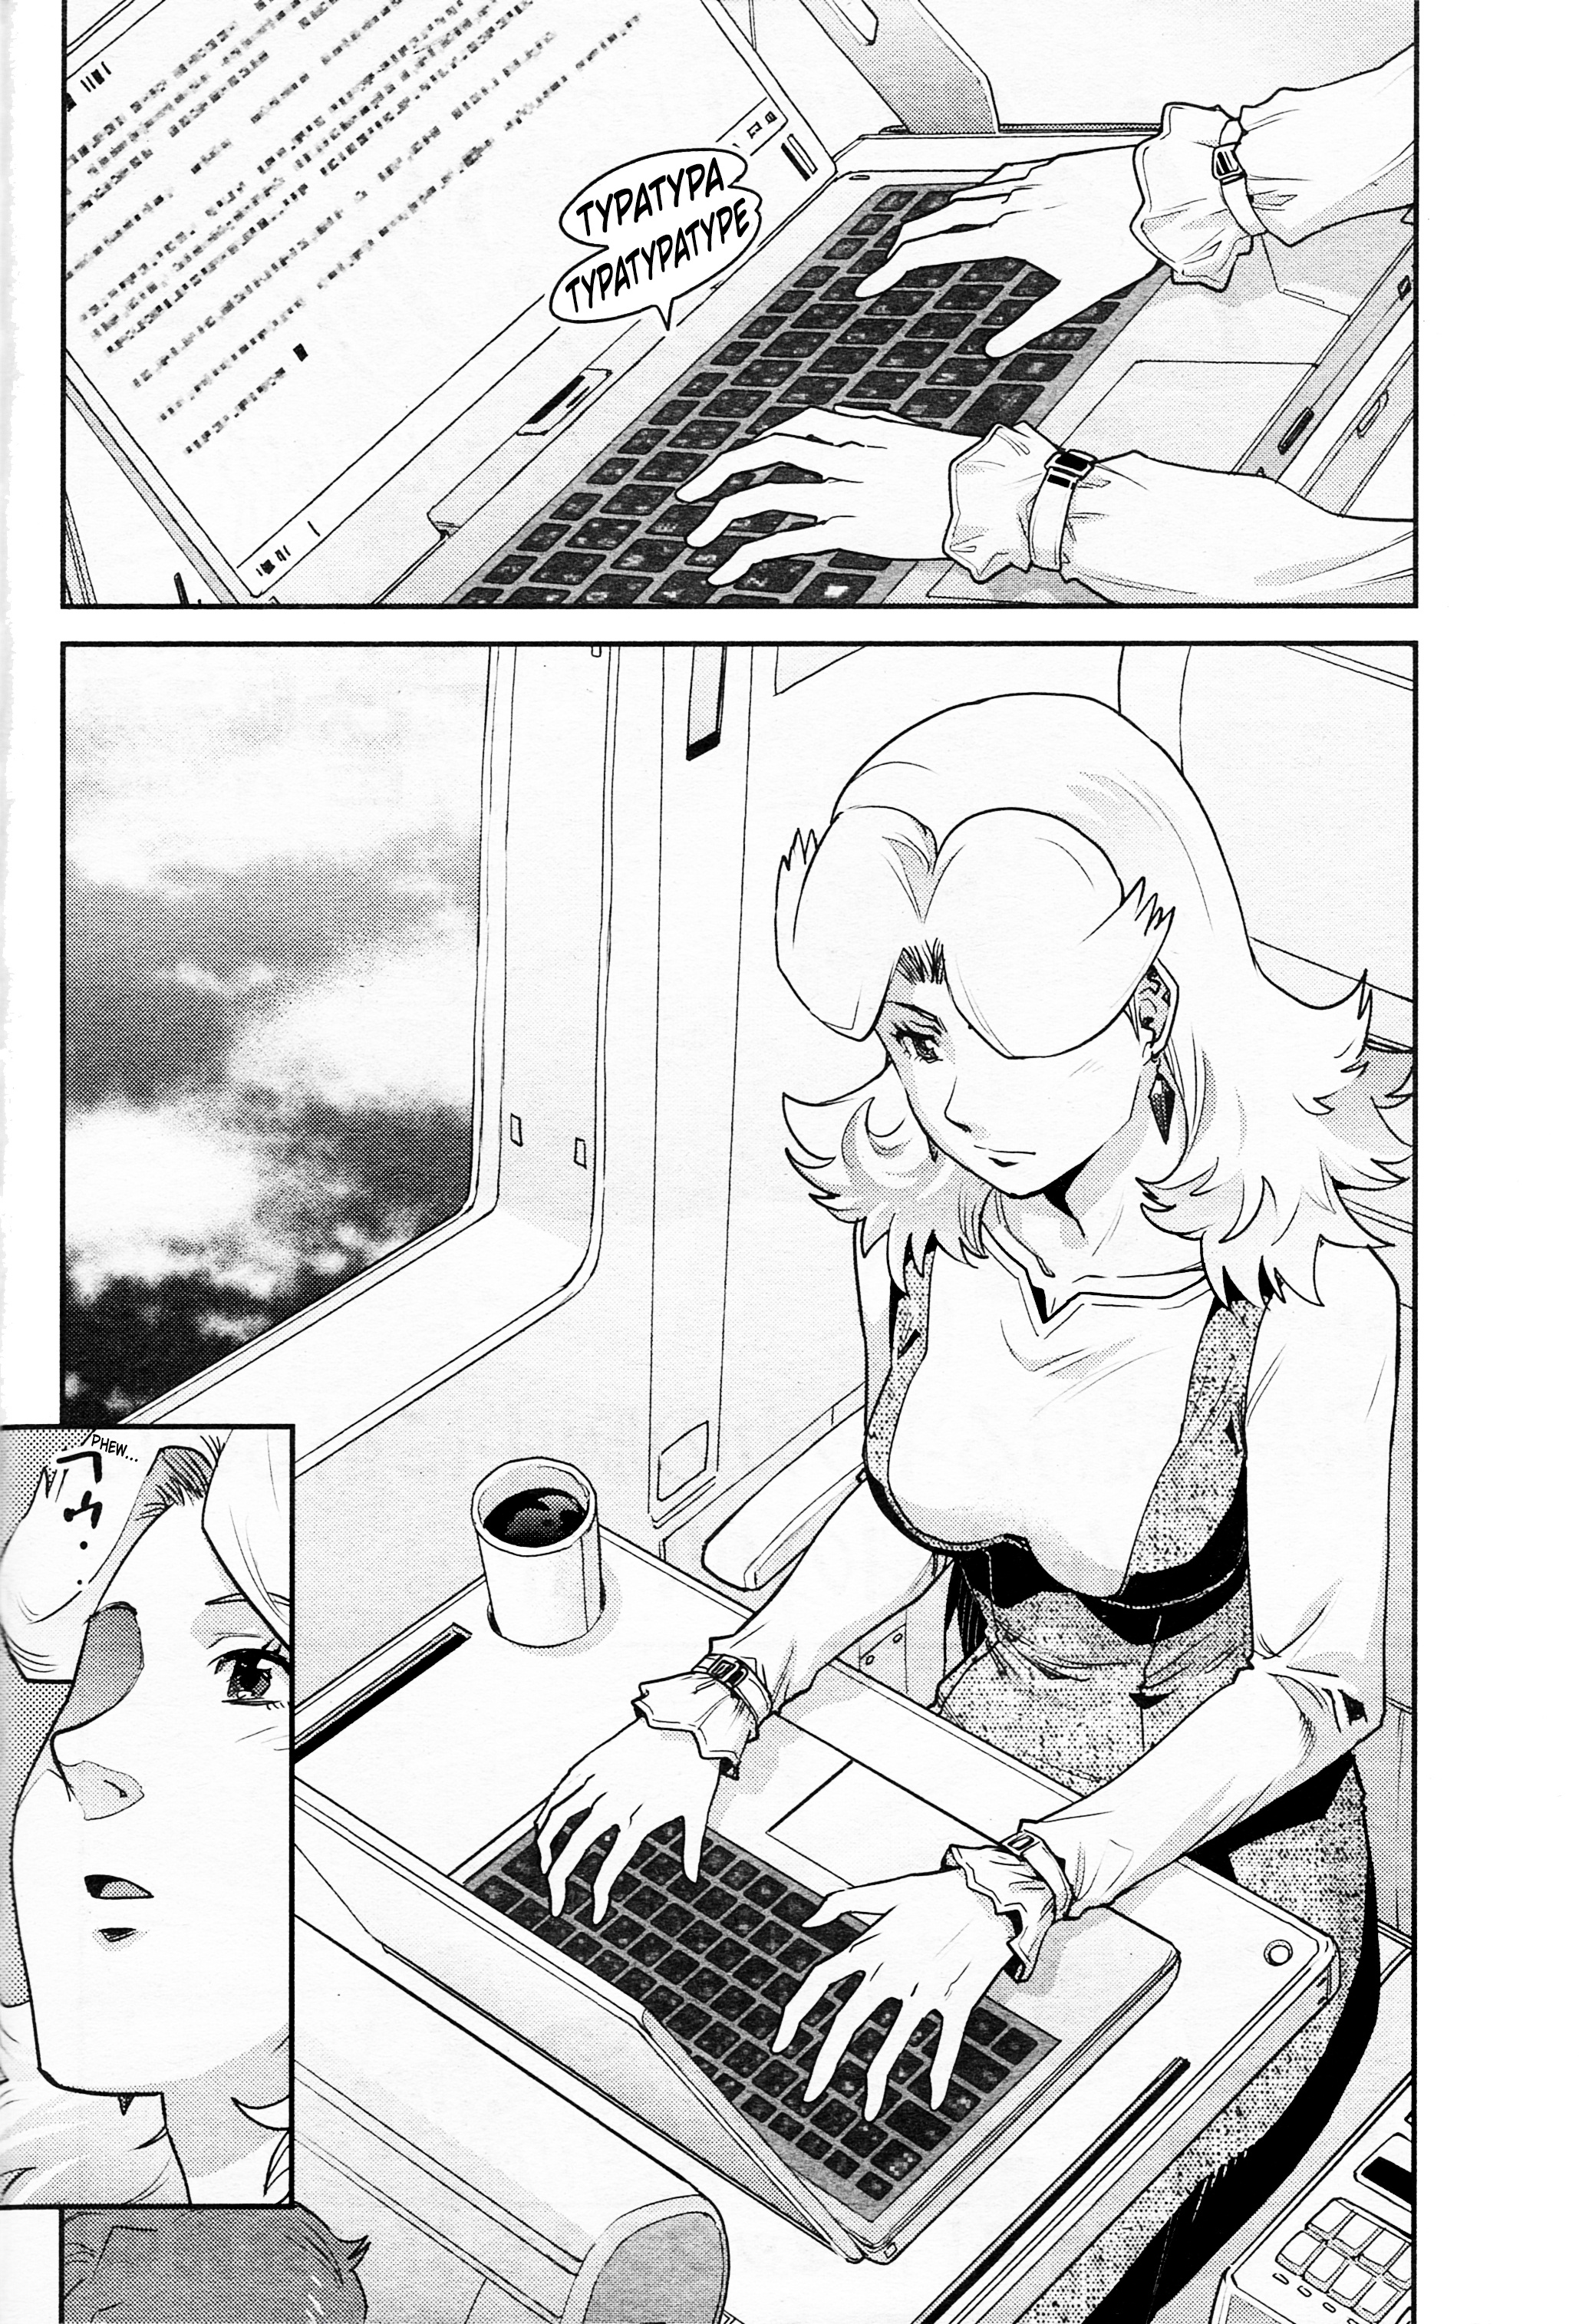 Mobile Suit Gundam Pulitzer - Amuro Ray Beyond The Aurora Vol.2 Chapter 11: Report 11: Drifting Memories - Picture 2